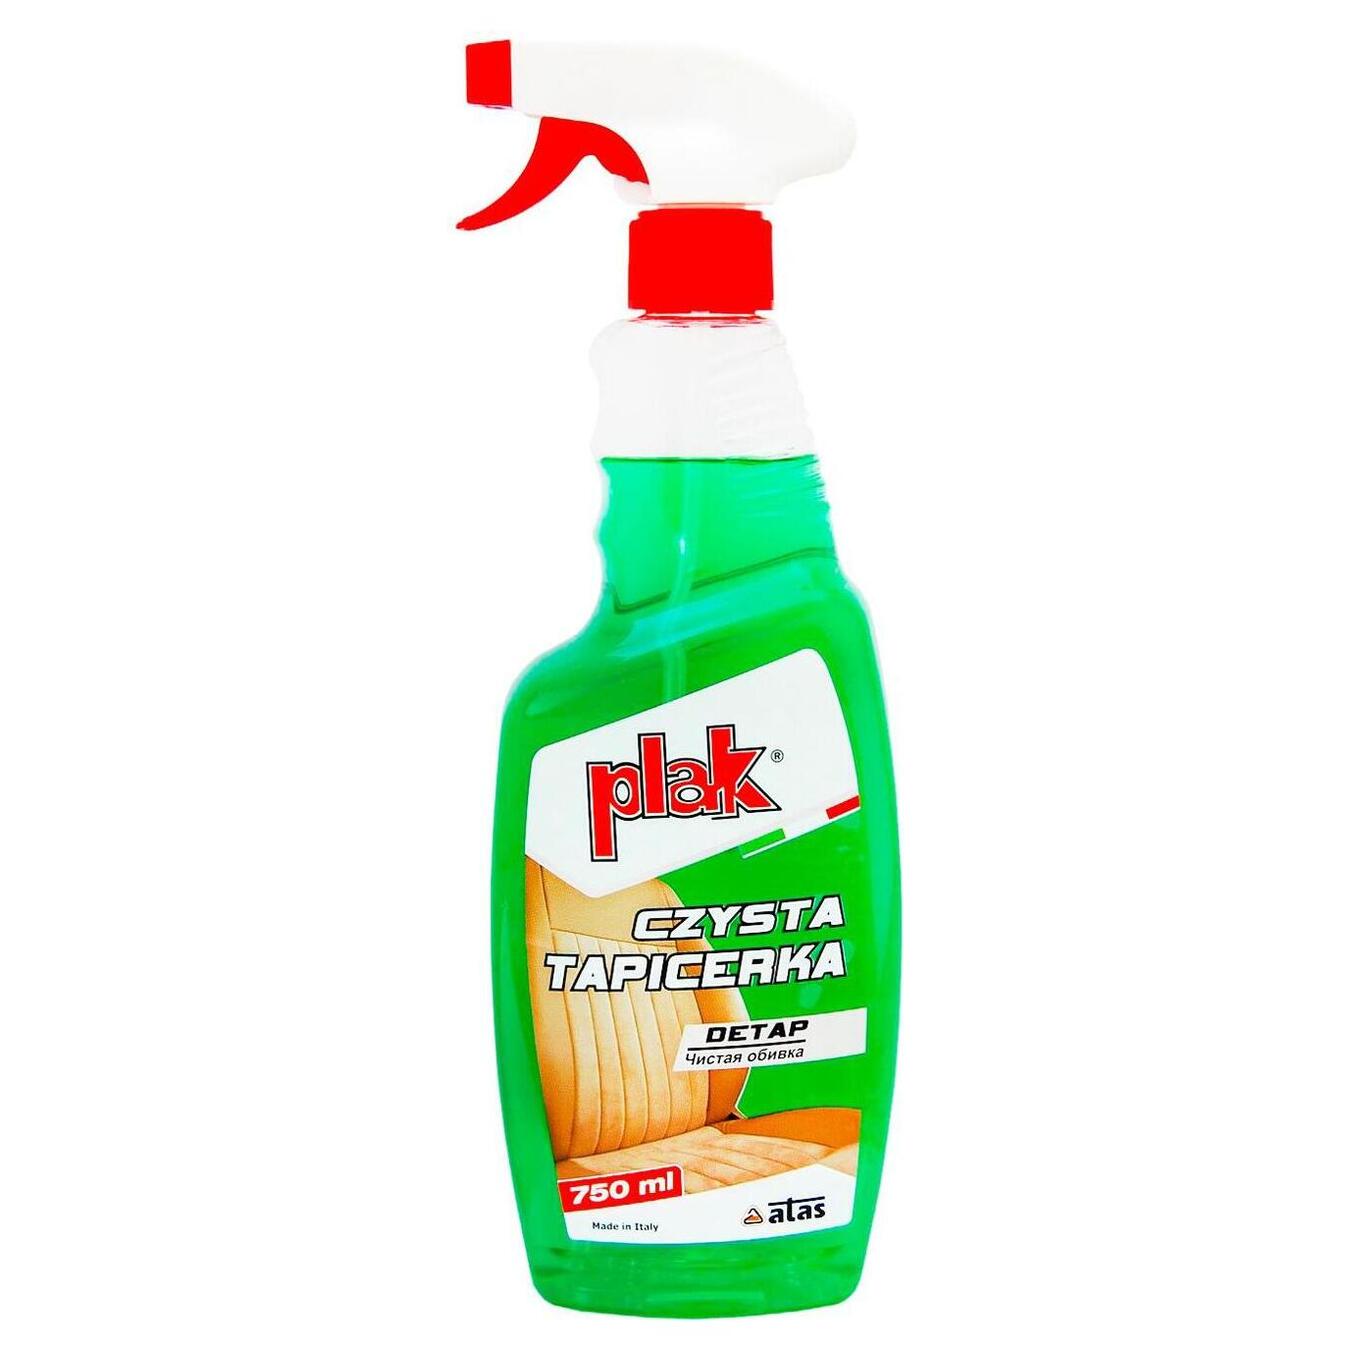 Atas means for cleaning upholstery and carpets 750ml